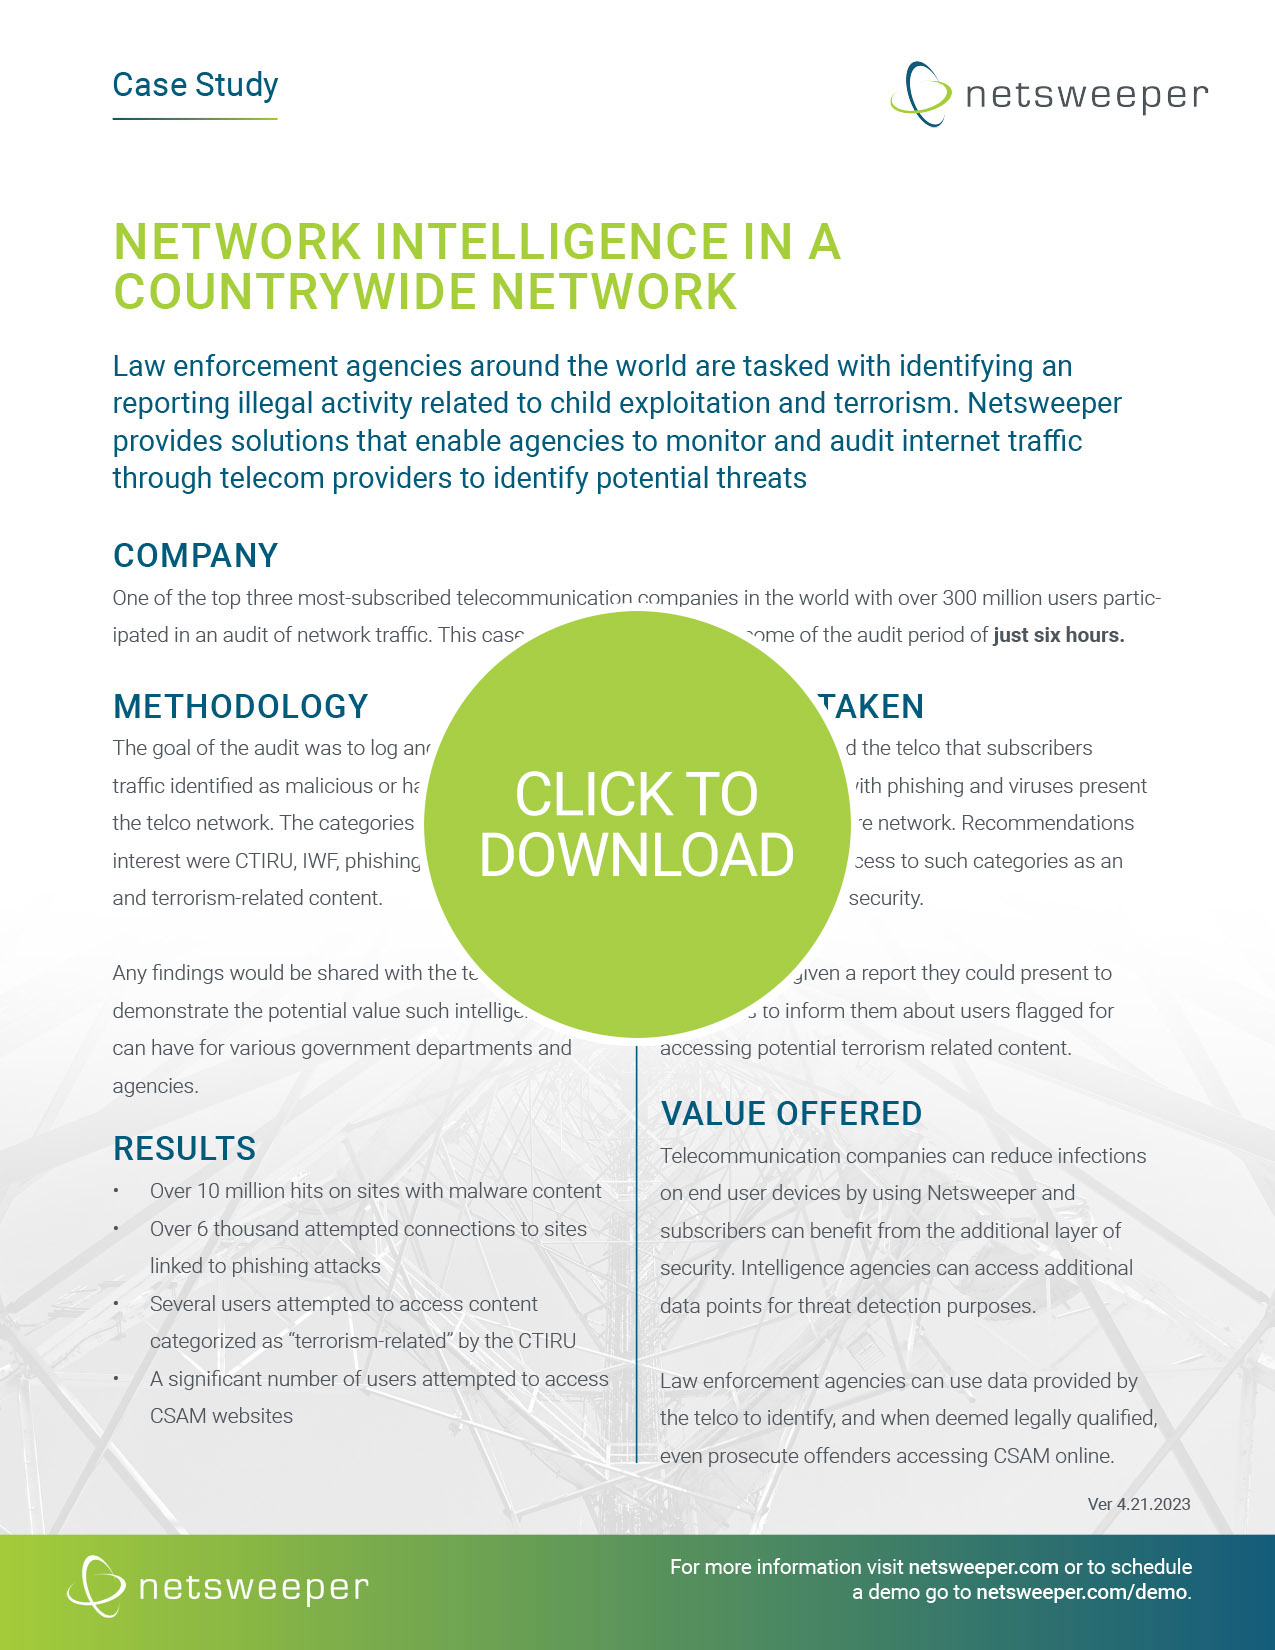 Case Study: Network Intelligence in a Countrywide Network